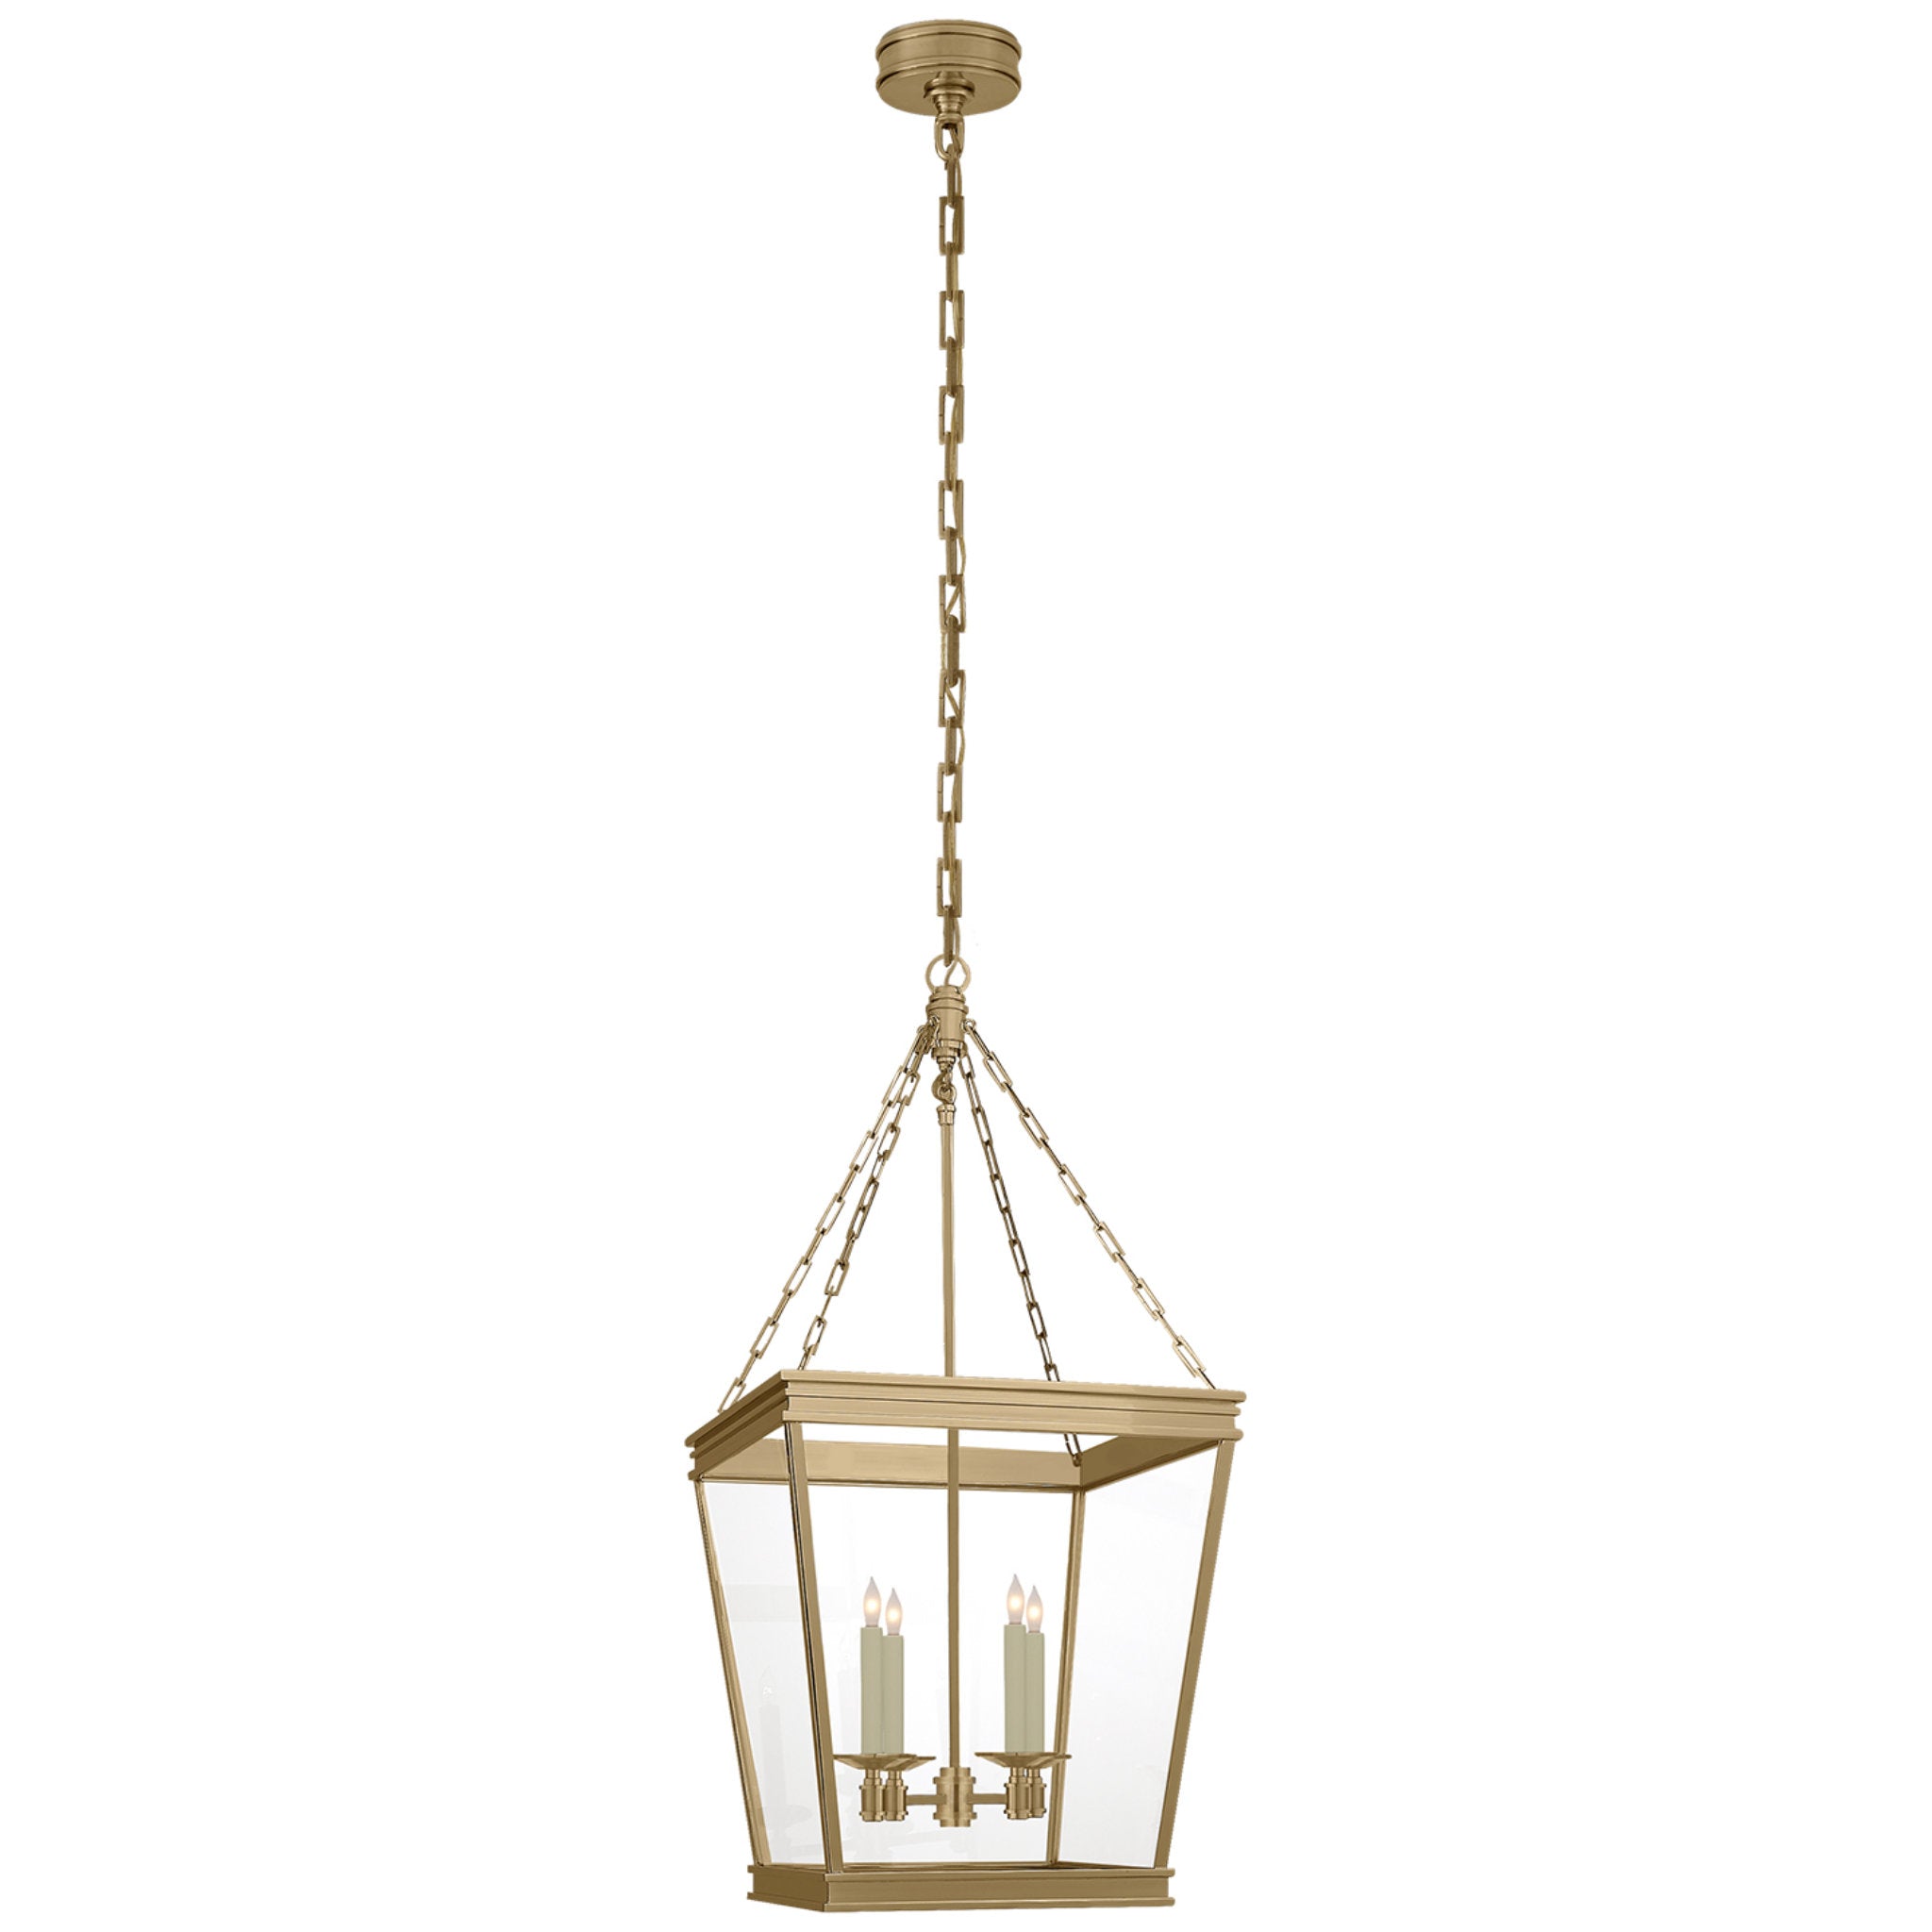 Chapman & Myers Launceton Medium Square Lantern in Antique- Burnished Brass with Clear Glass